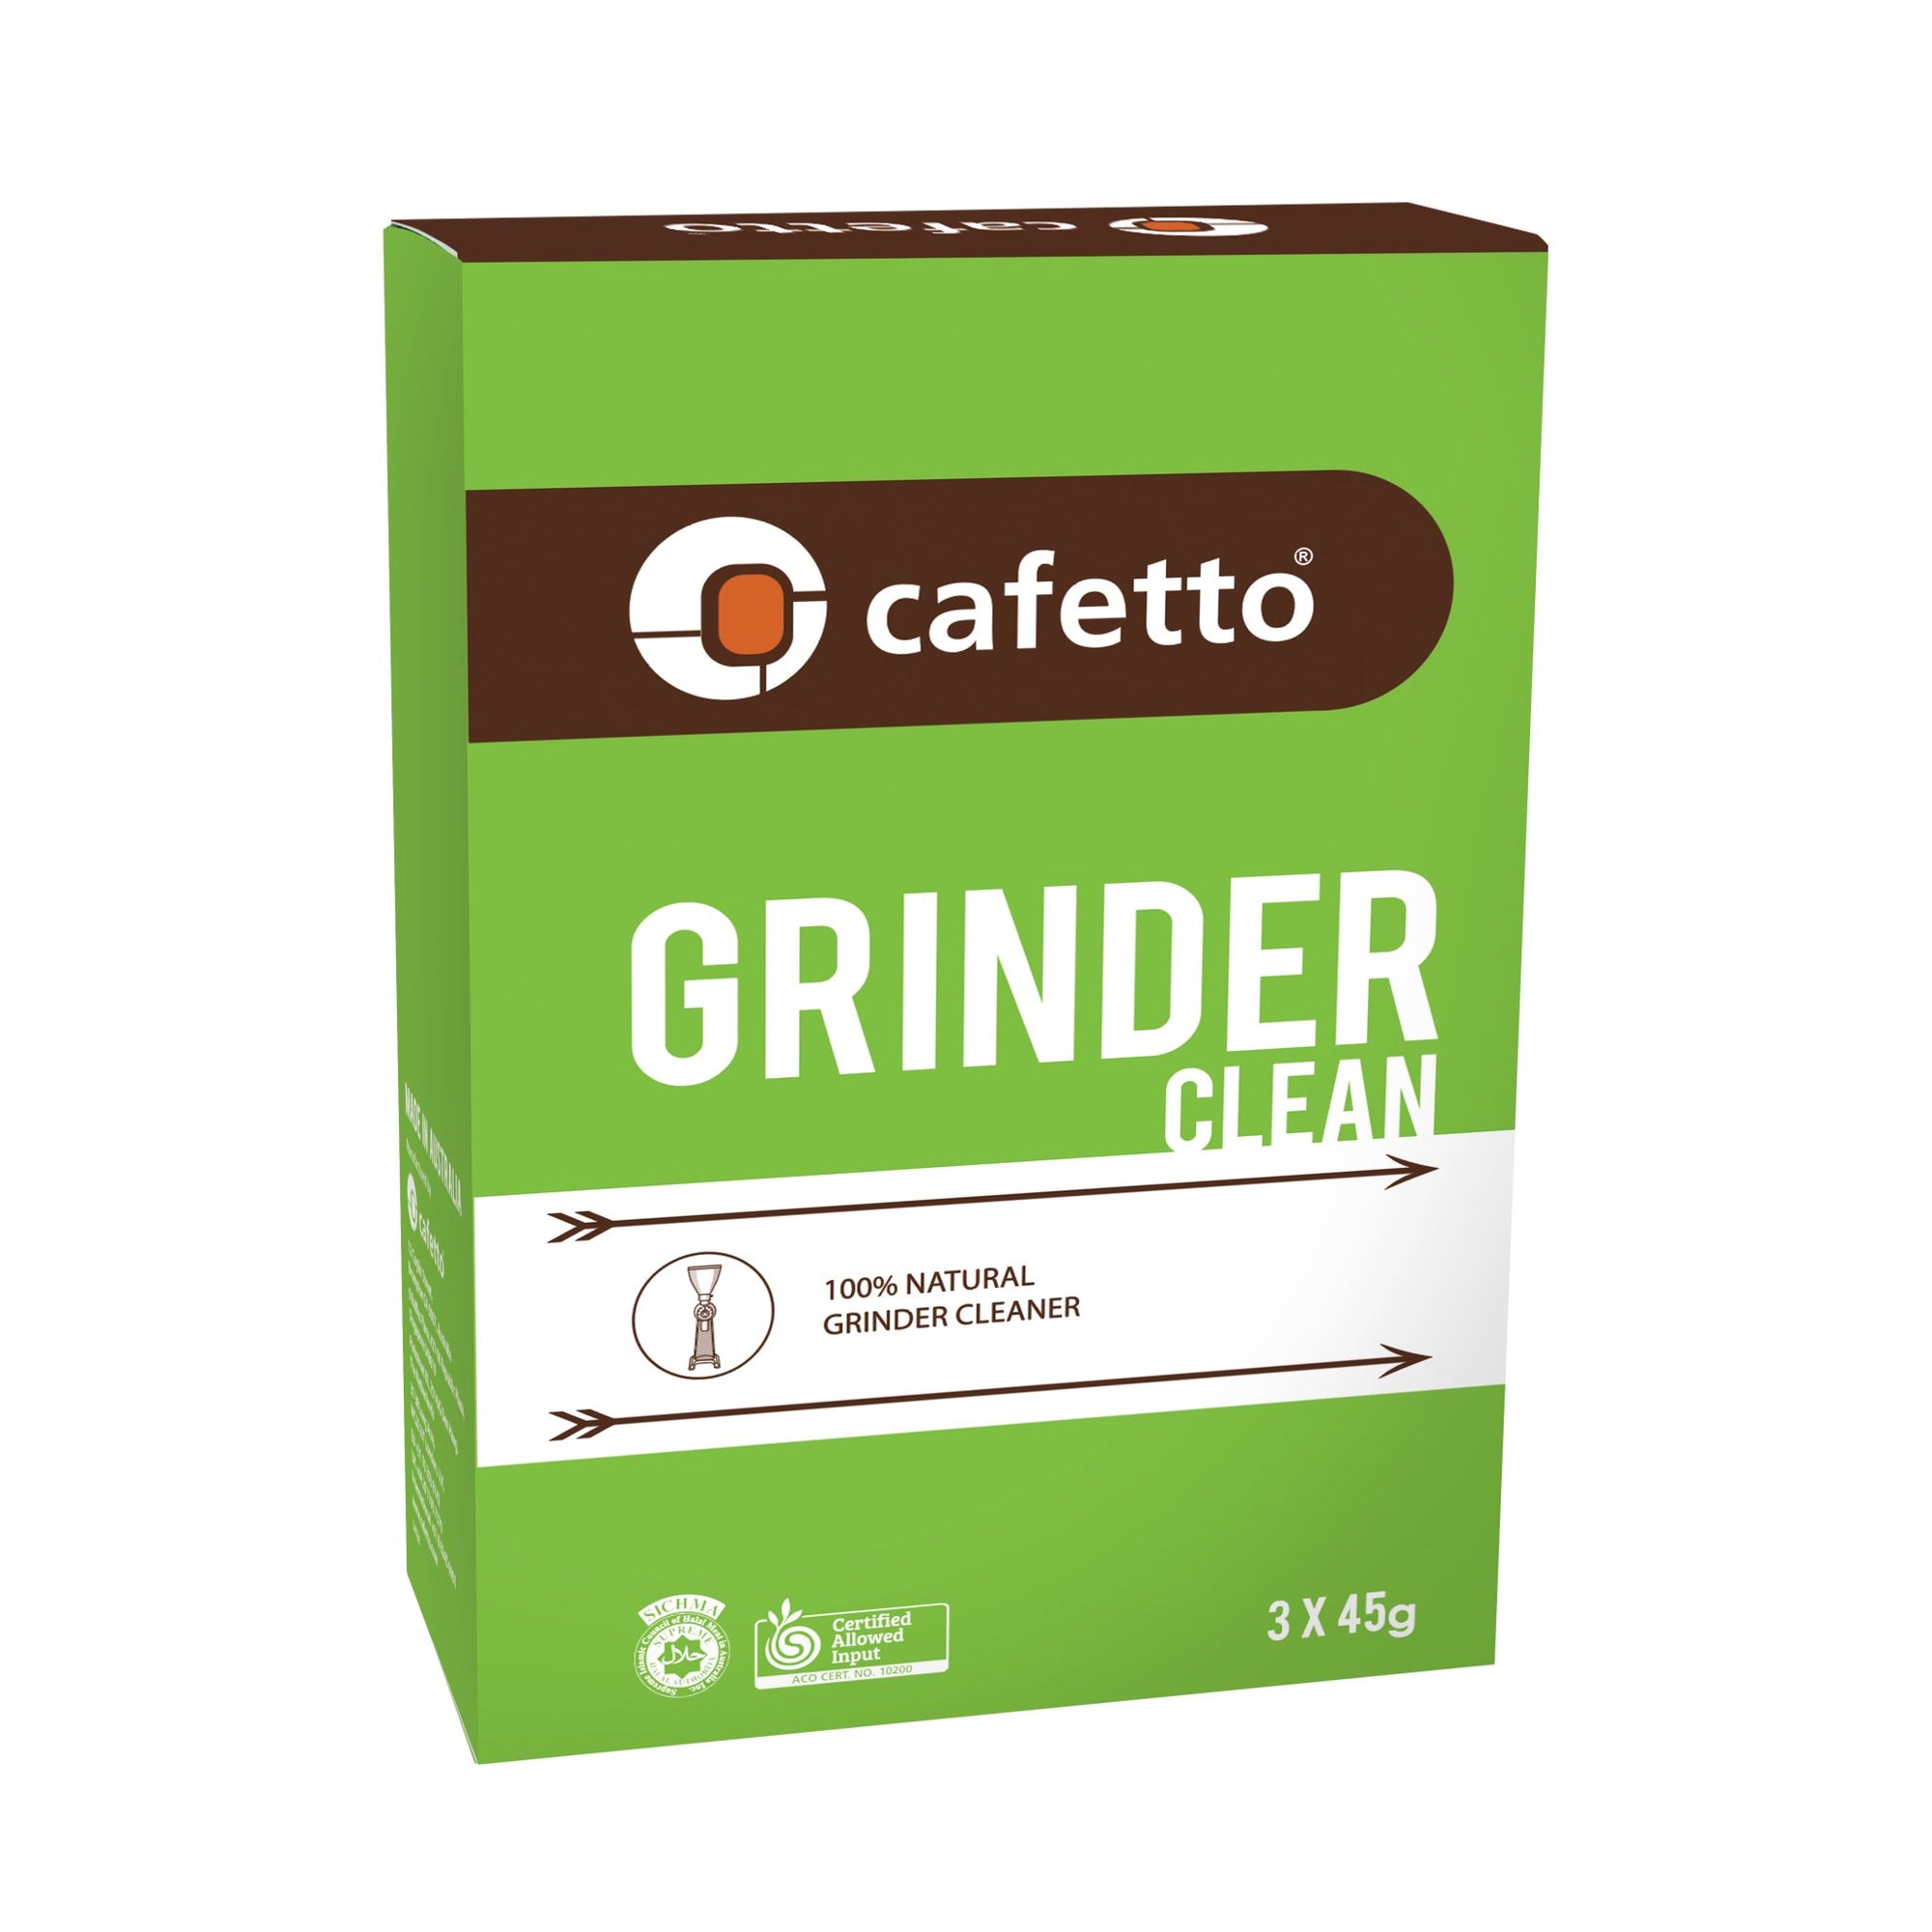 Cafetto - Grinder Clean - Corporate Coffee